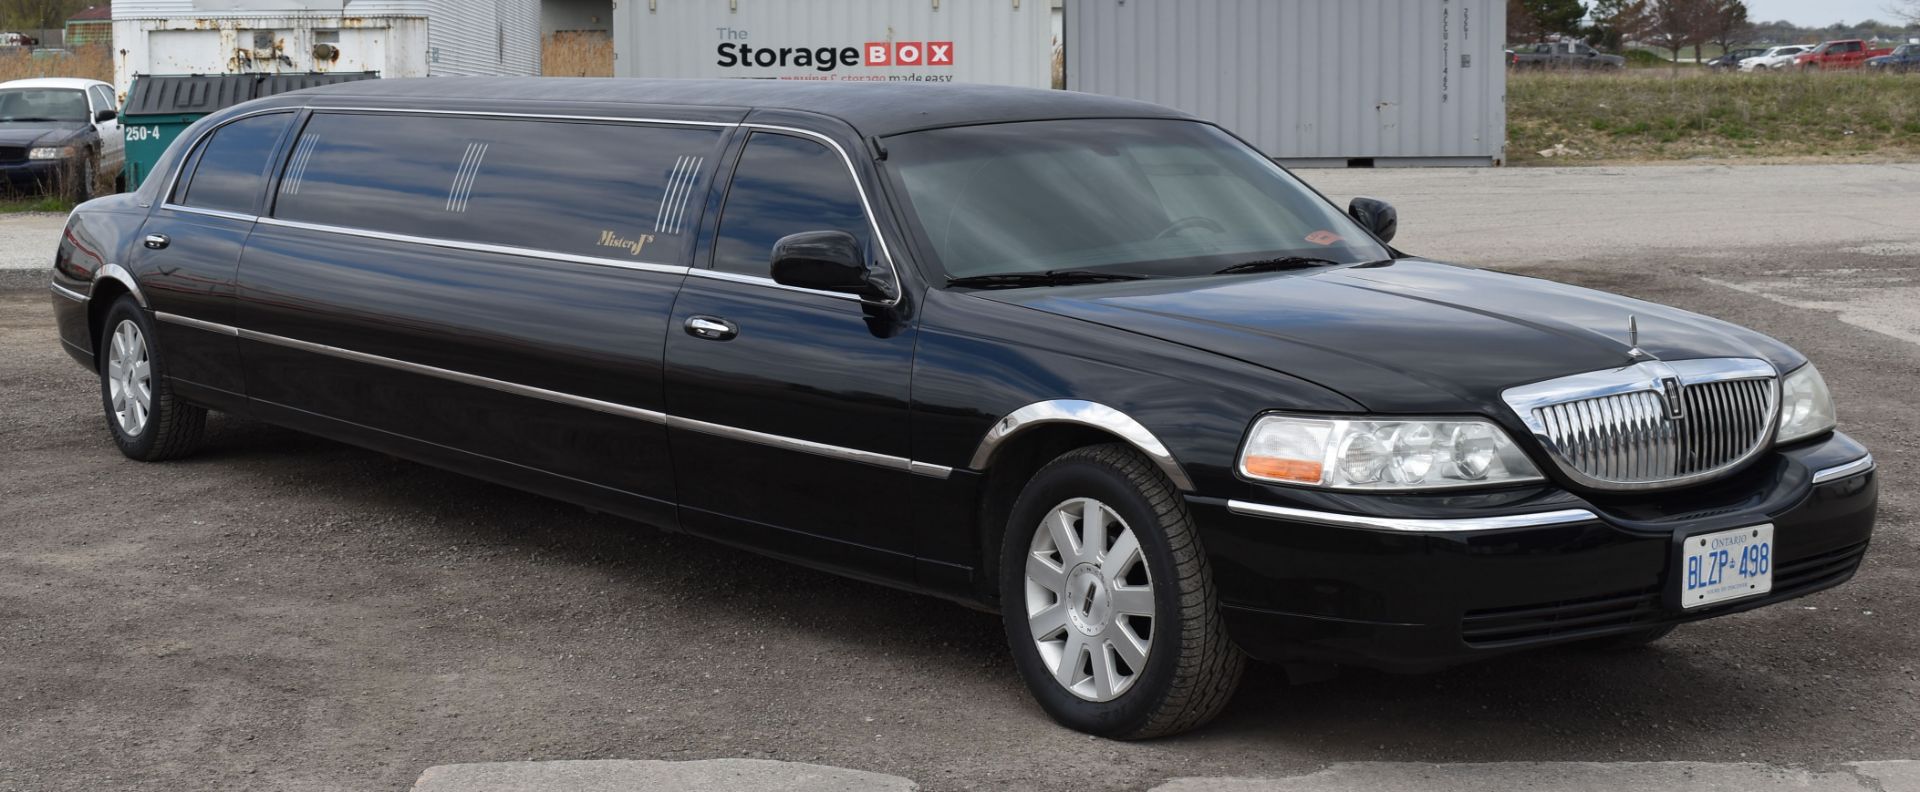 LINCOLN (2005) TOWN CAR 8 PASSENGER STRETCH LIMOUSINE WITH 8 CYLINDER 4.6L GAS ENGINE, 240,687KM ( - Image 3 of 20